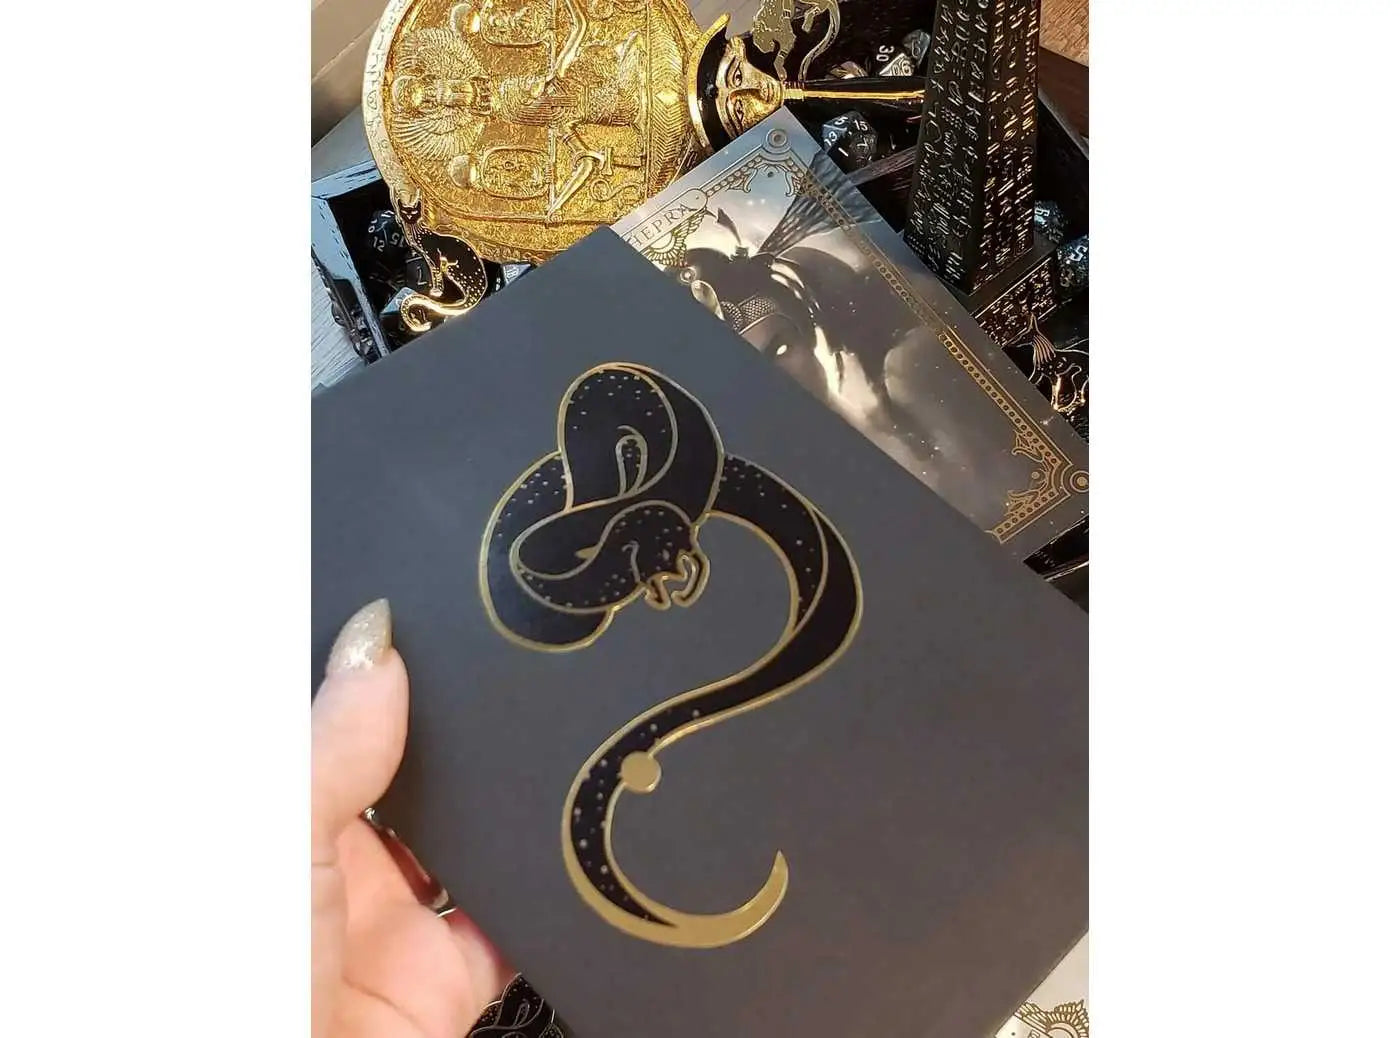 Apep Sticker - Egyptian Stickers - God of Darkness - Egyptian Mythology Gifts - Snake Decal - Planner, Journal • Gold Foil Metallic Chrome